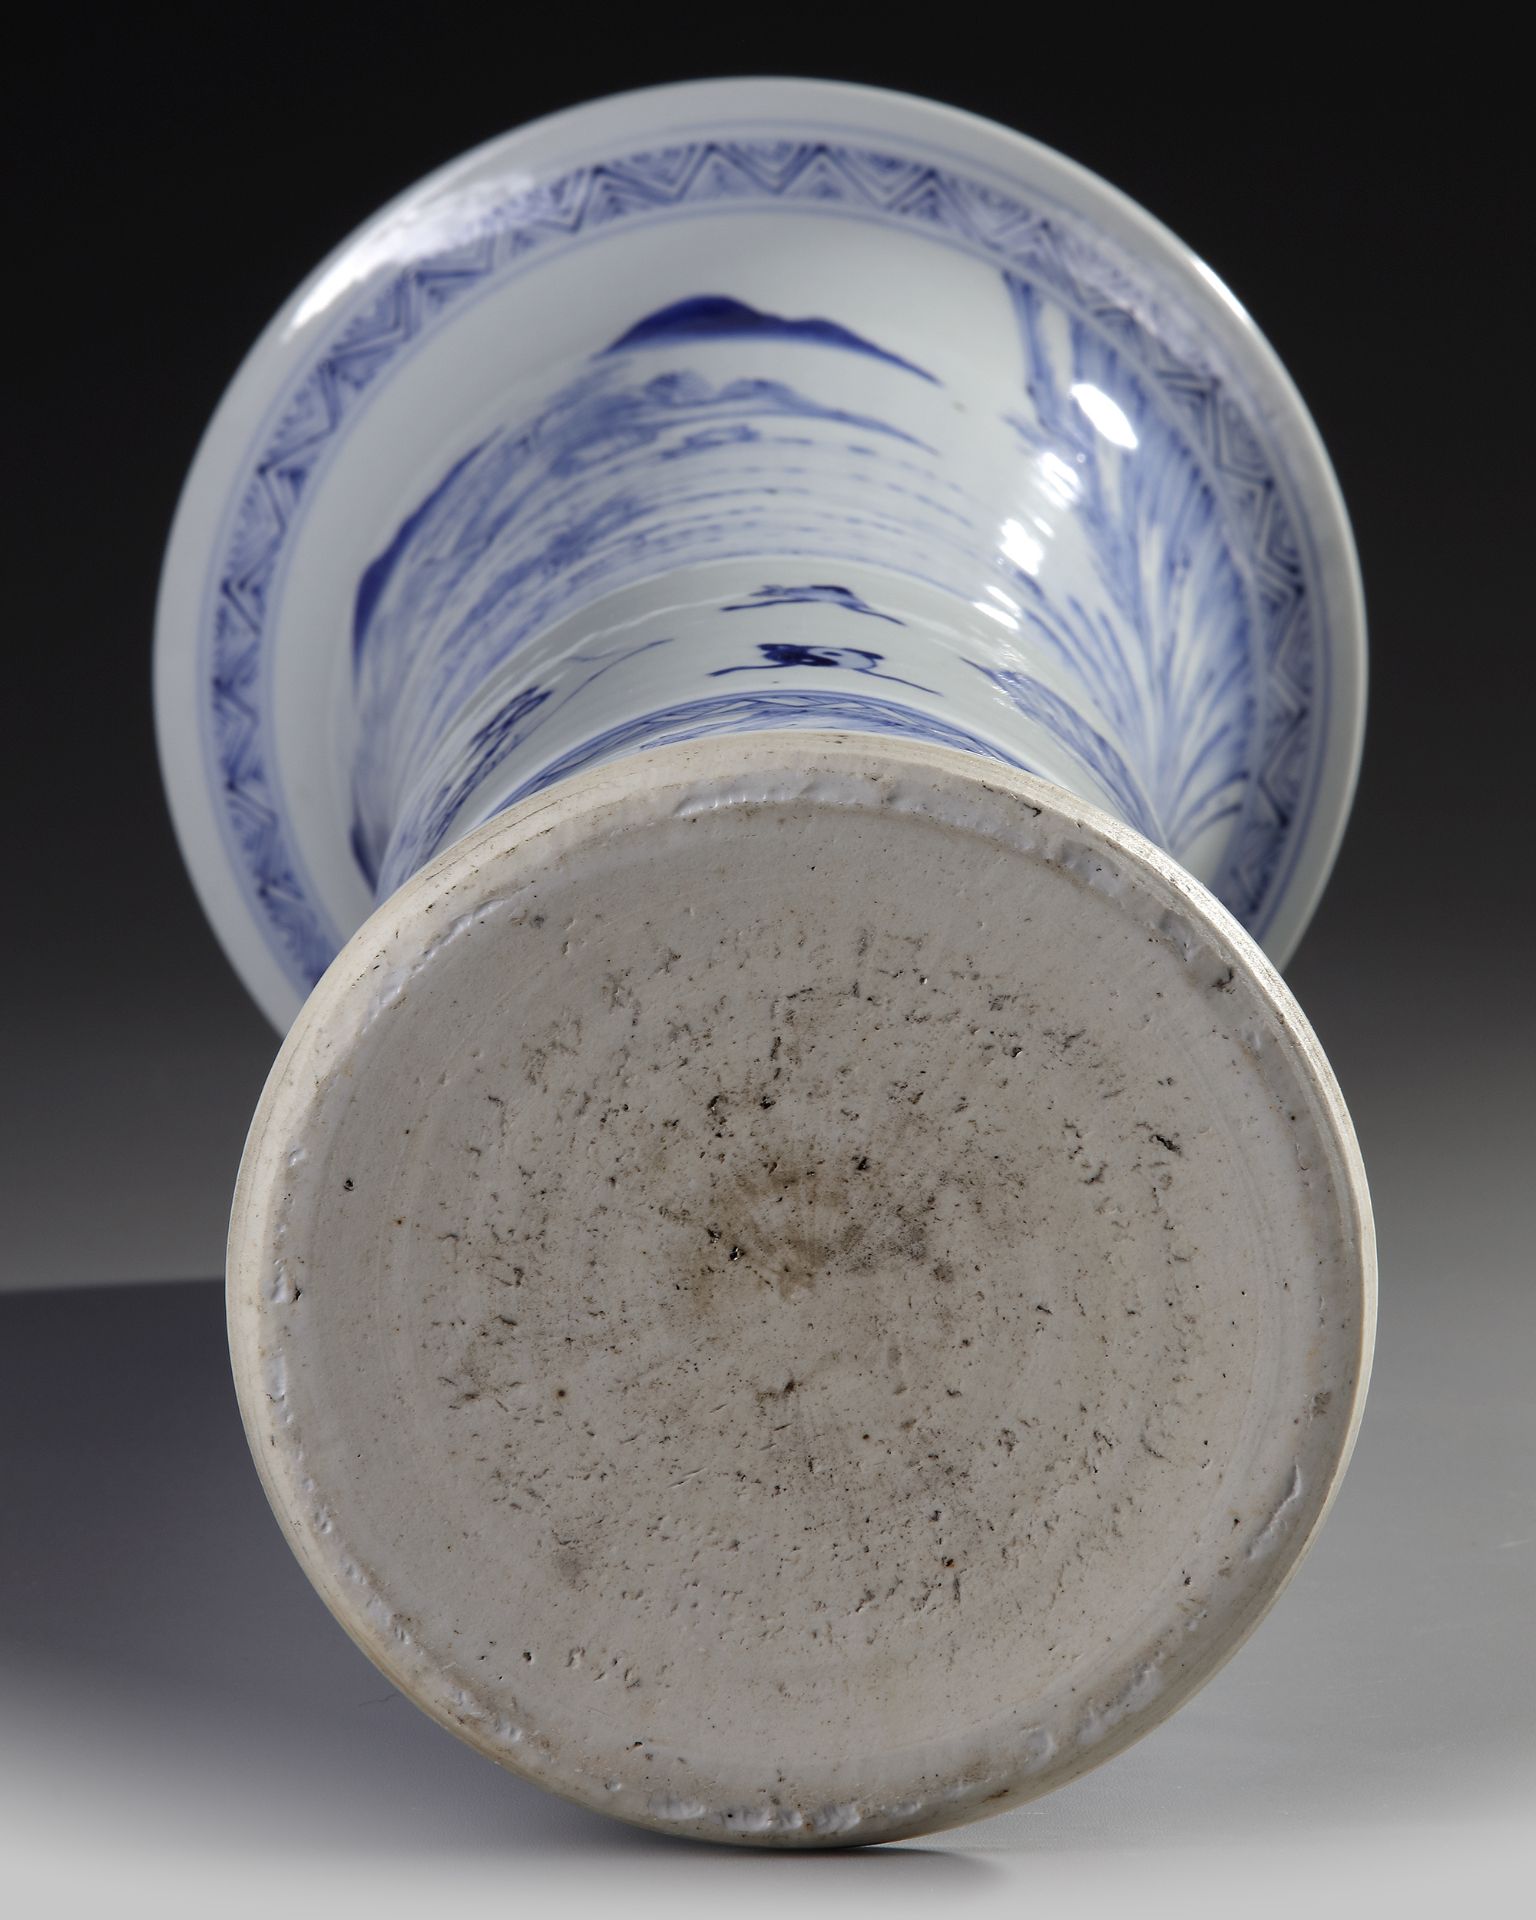 A CHINESE BLUE AND WHITE GU VASE, QING DYNASTY (1644-1911) - Image 4 of 4